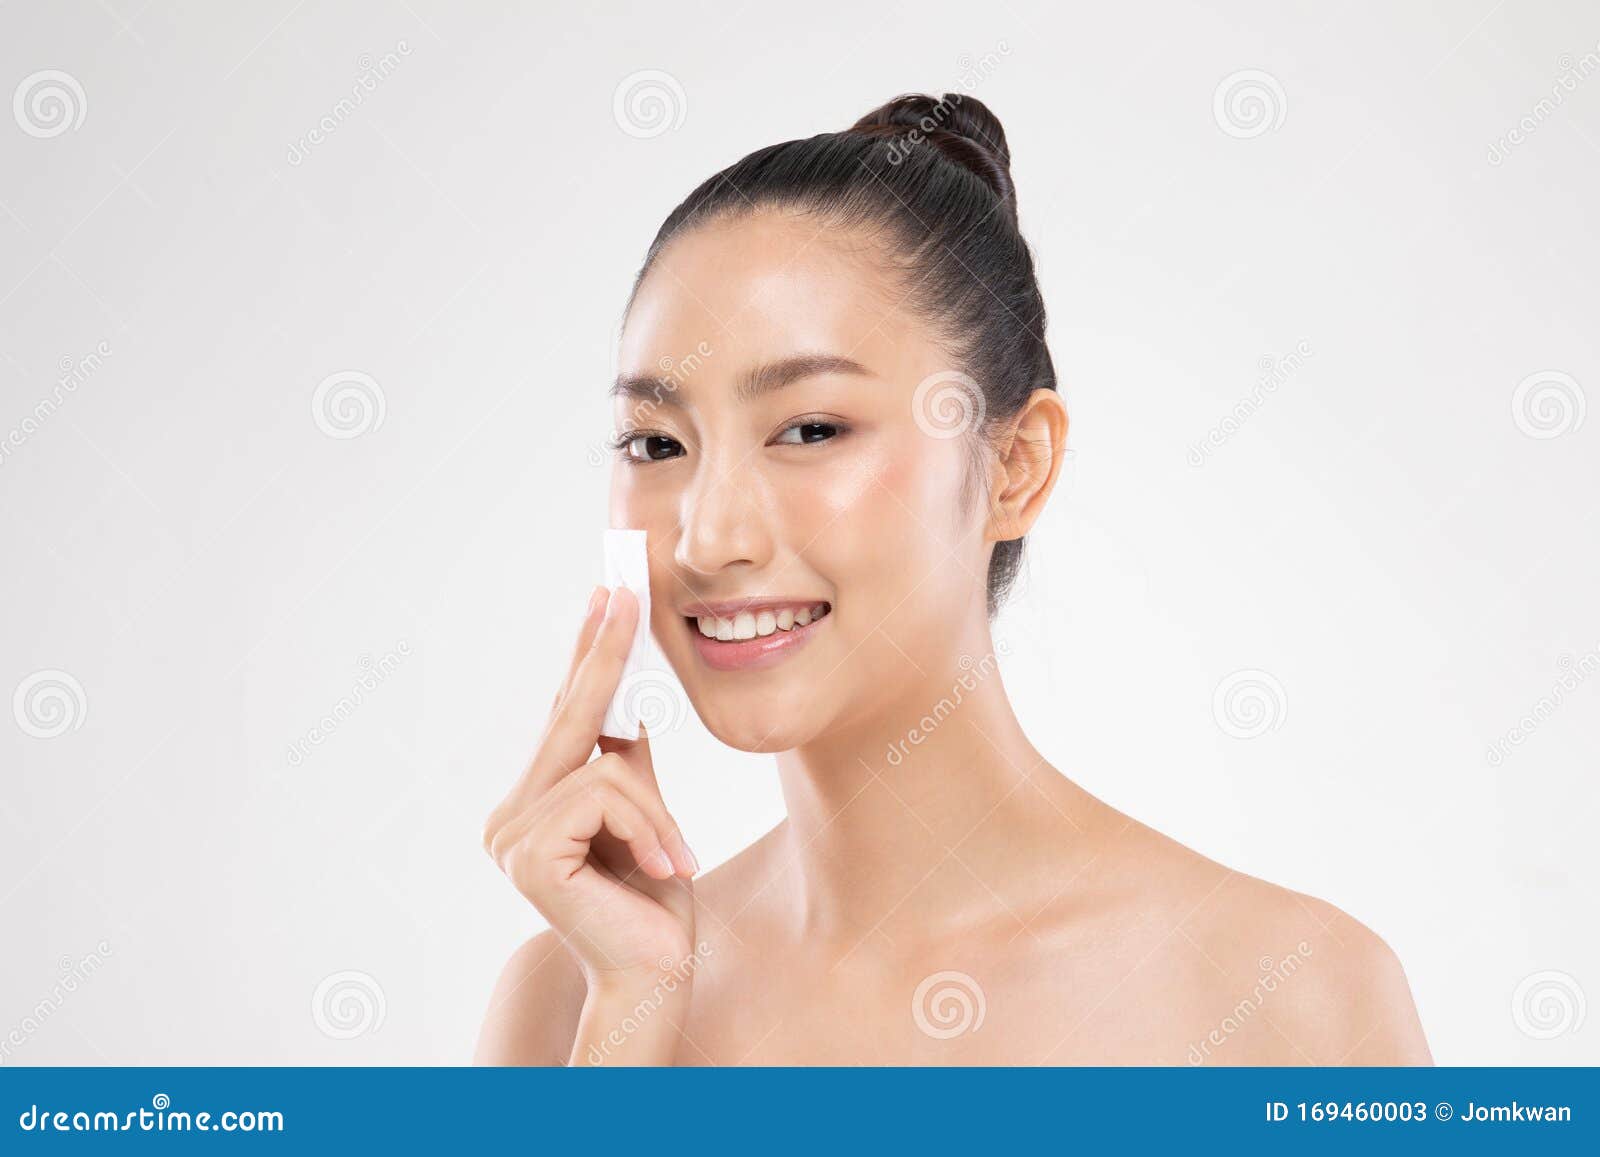 https://thumbs.dreamstime.com/z/attractive-charming-asian-young-woman-smile-using-tissue-toner-cleaning-make-up-feeling-fresh-clean-healt-healthy-169460003.jpg